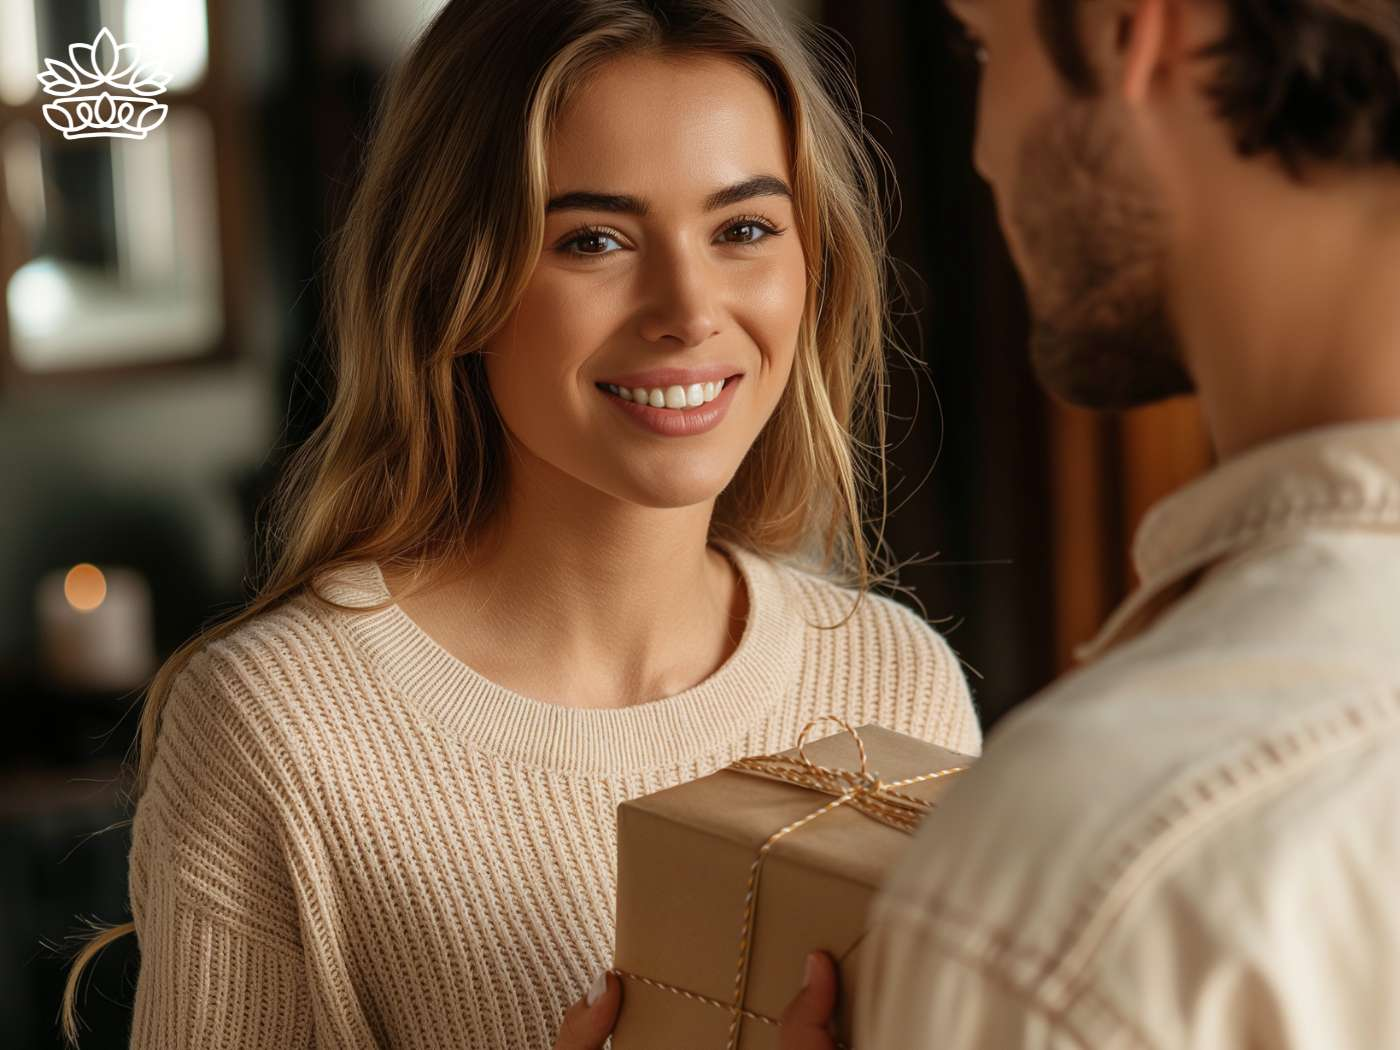 Smiling woman receiving a tastefully wrapped gift box, embodying the thoughtful essence of Fabulous Flowers and Gifts.